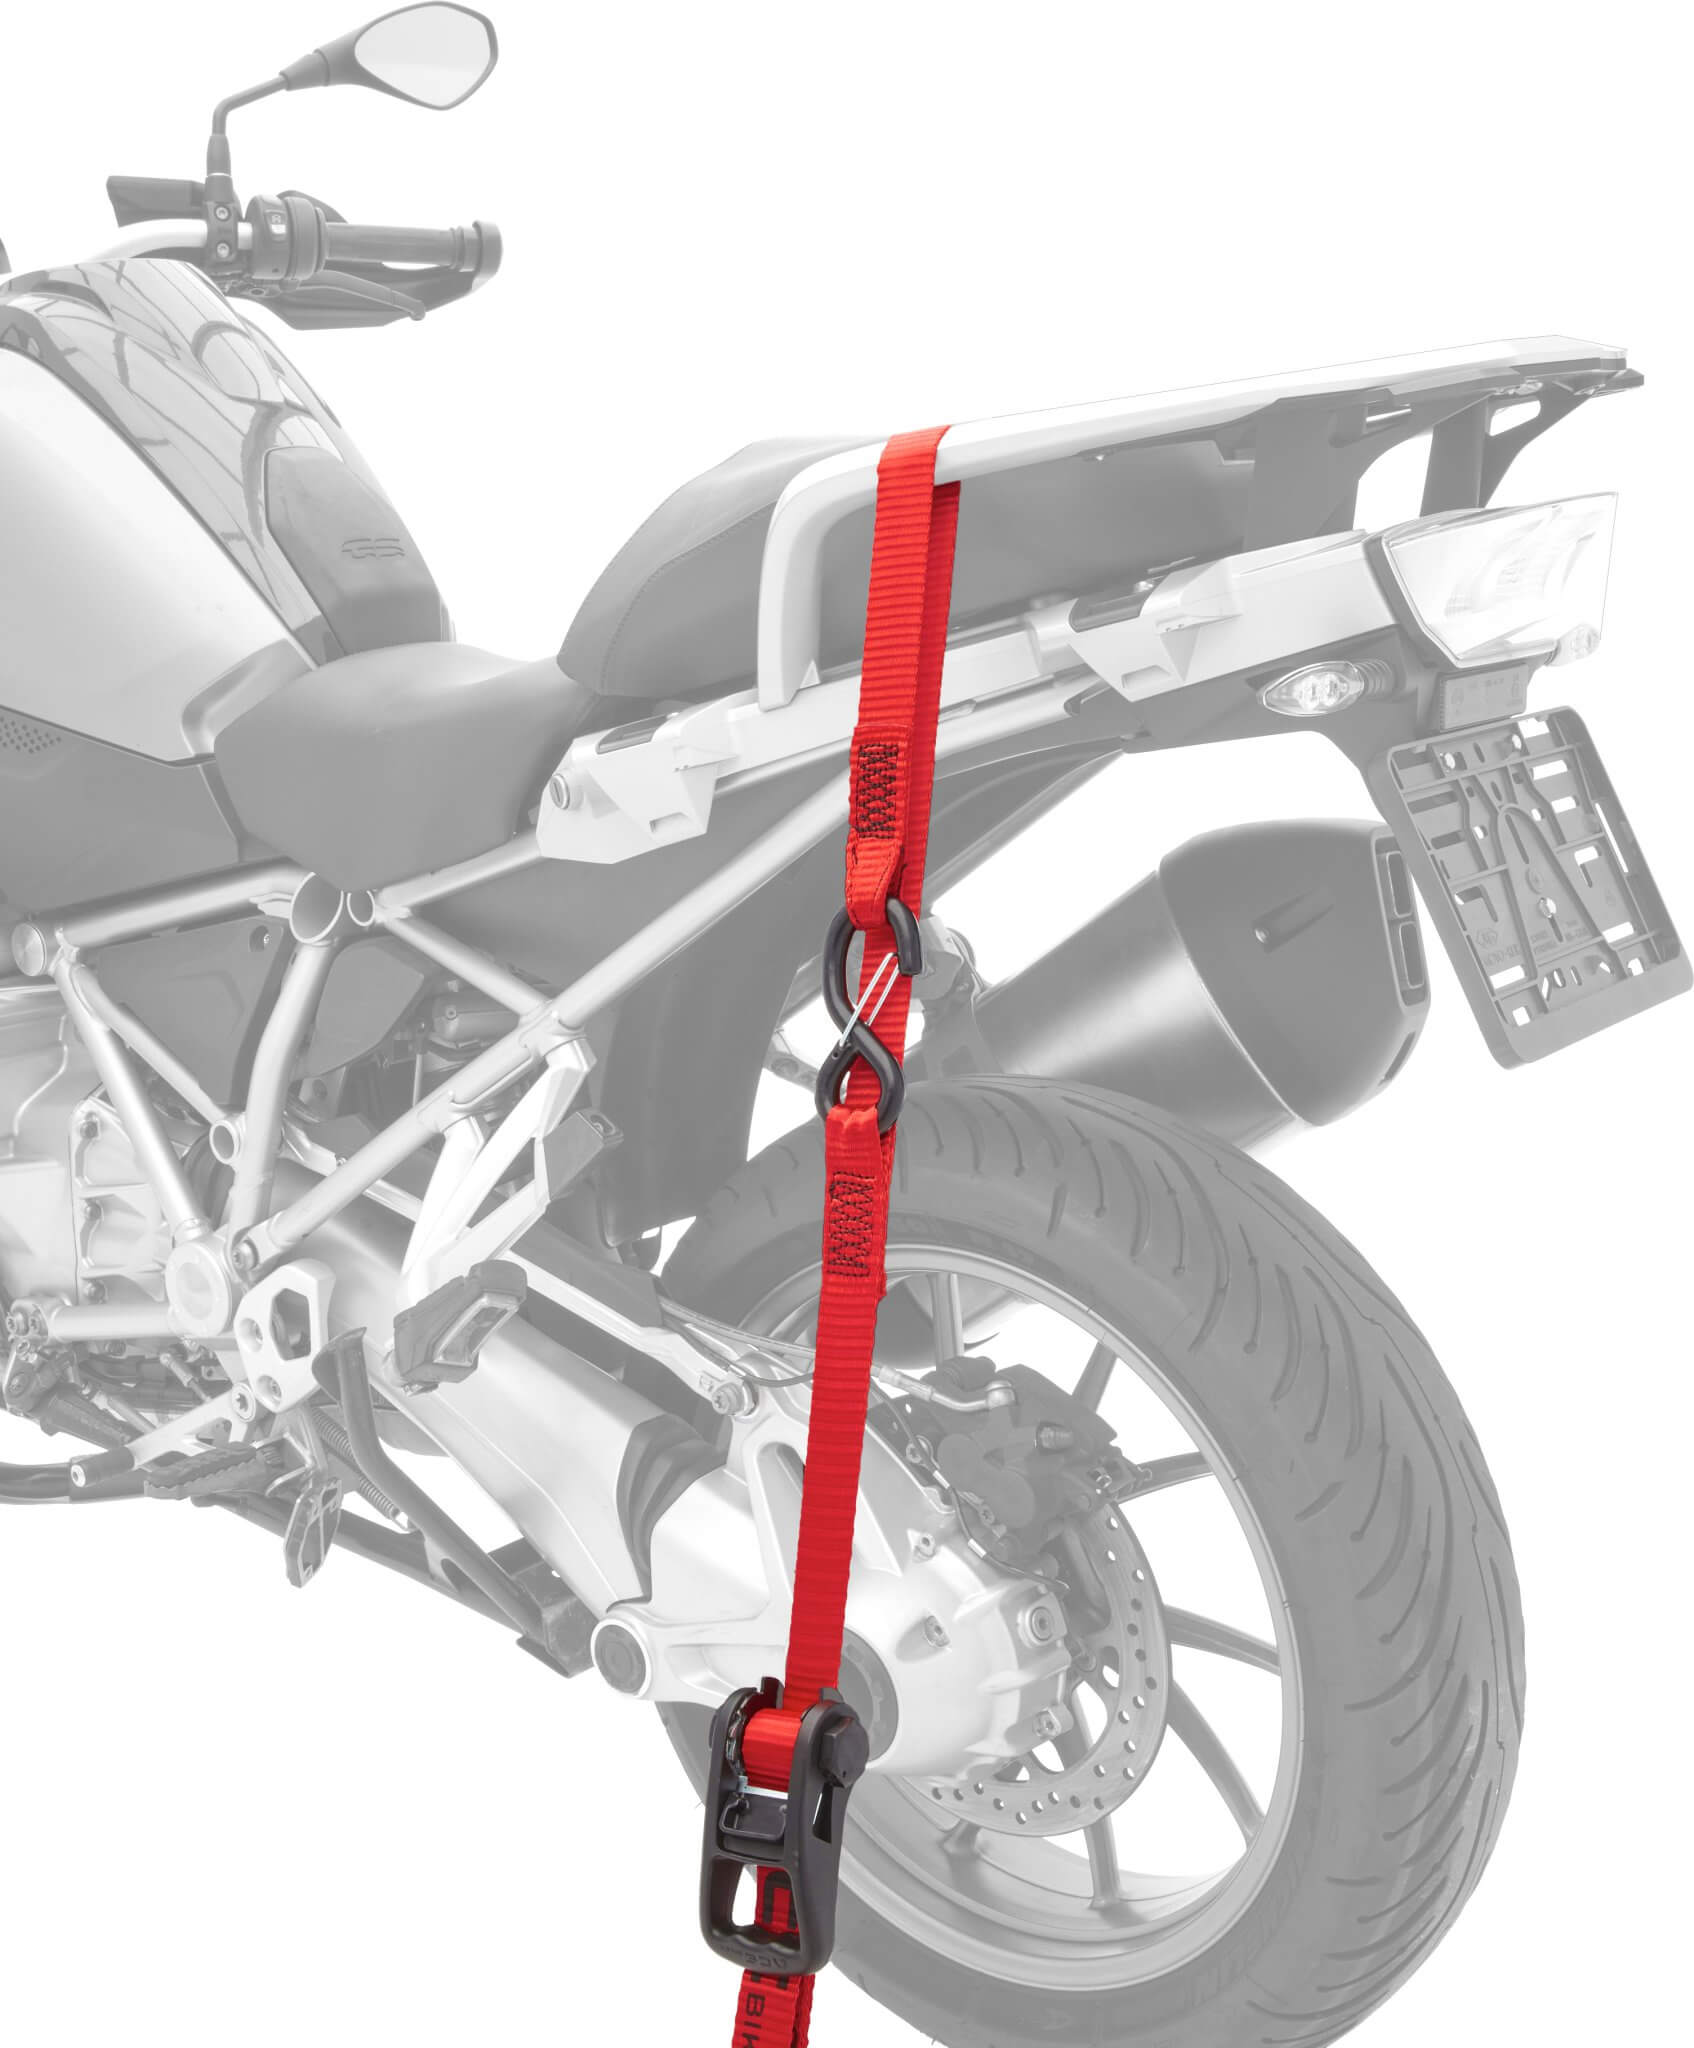 Buckle-Up - Acebikes - Transport Solutions - Motorcycle Lashing